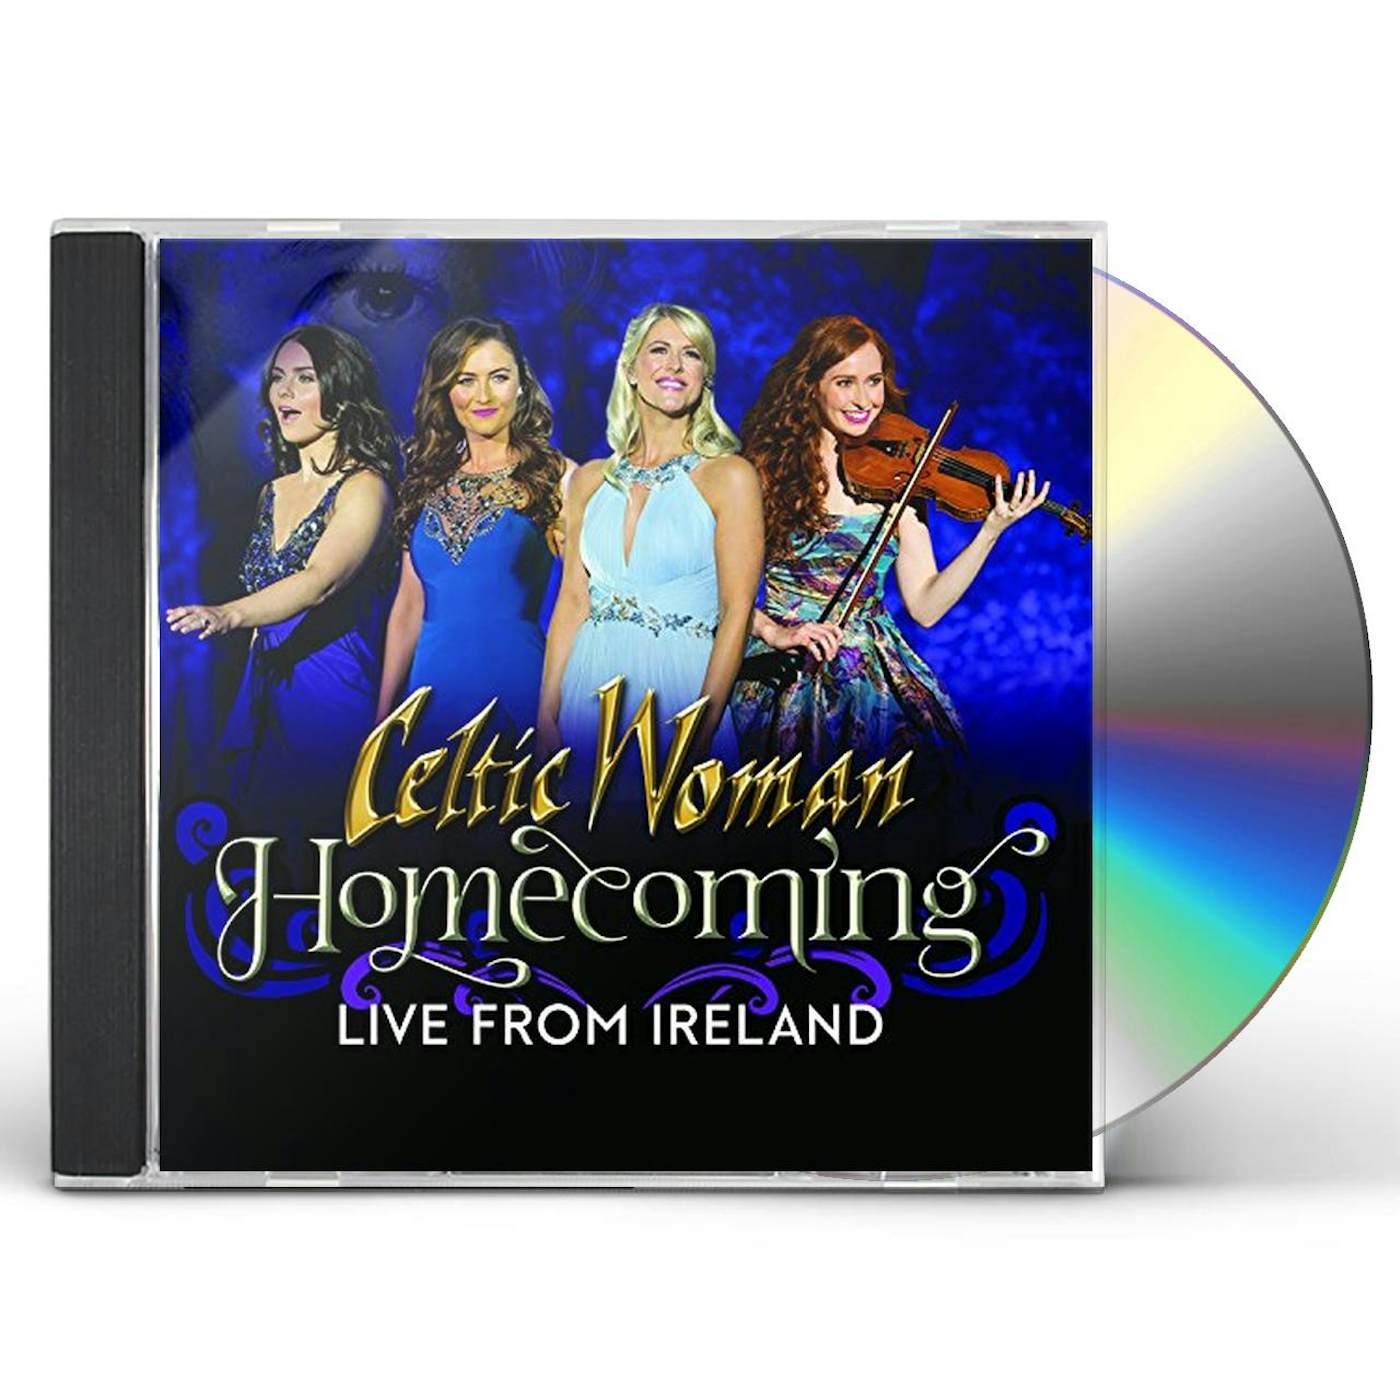 Celtic Woman HOMECOMING - LIVE FROM IRELAND CD